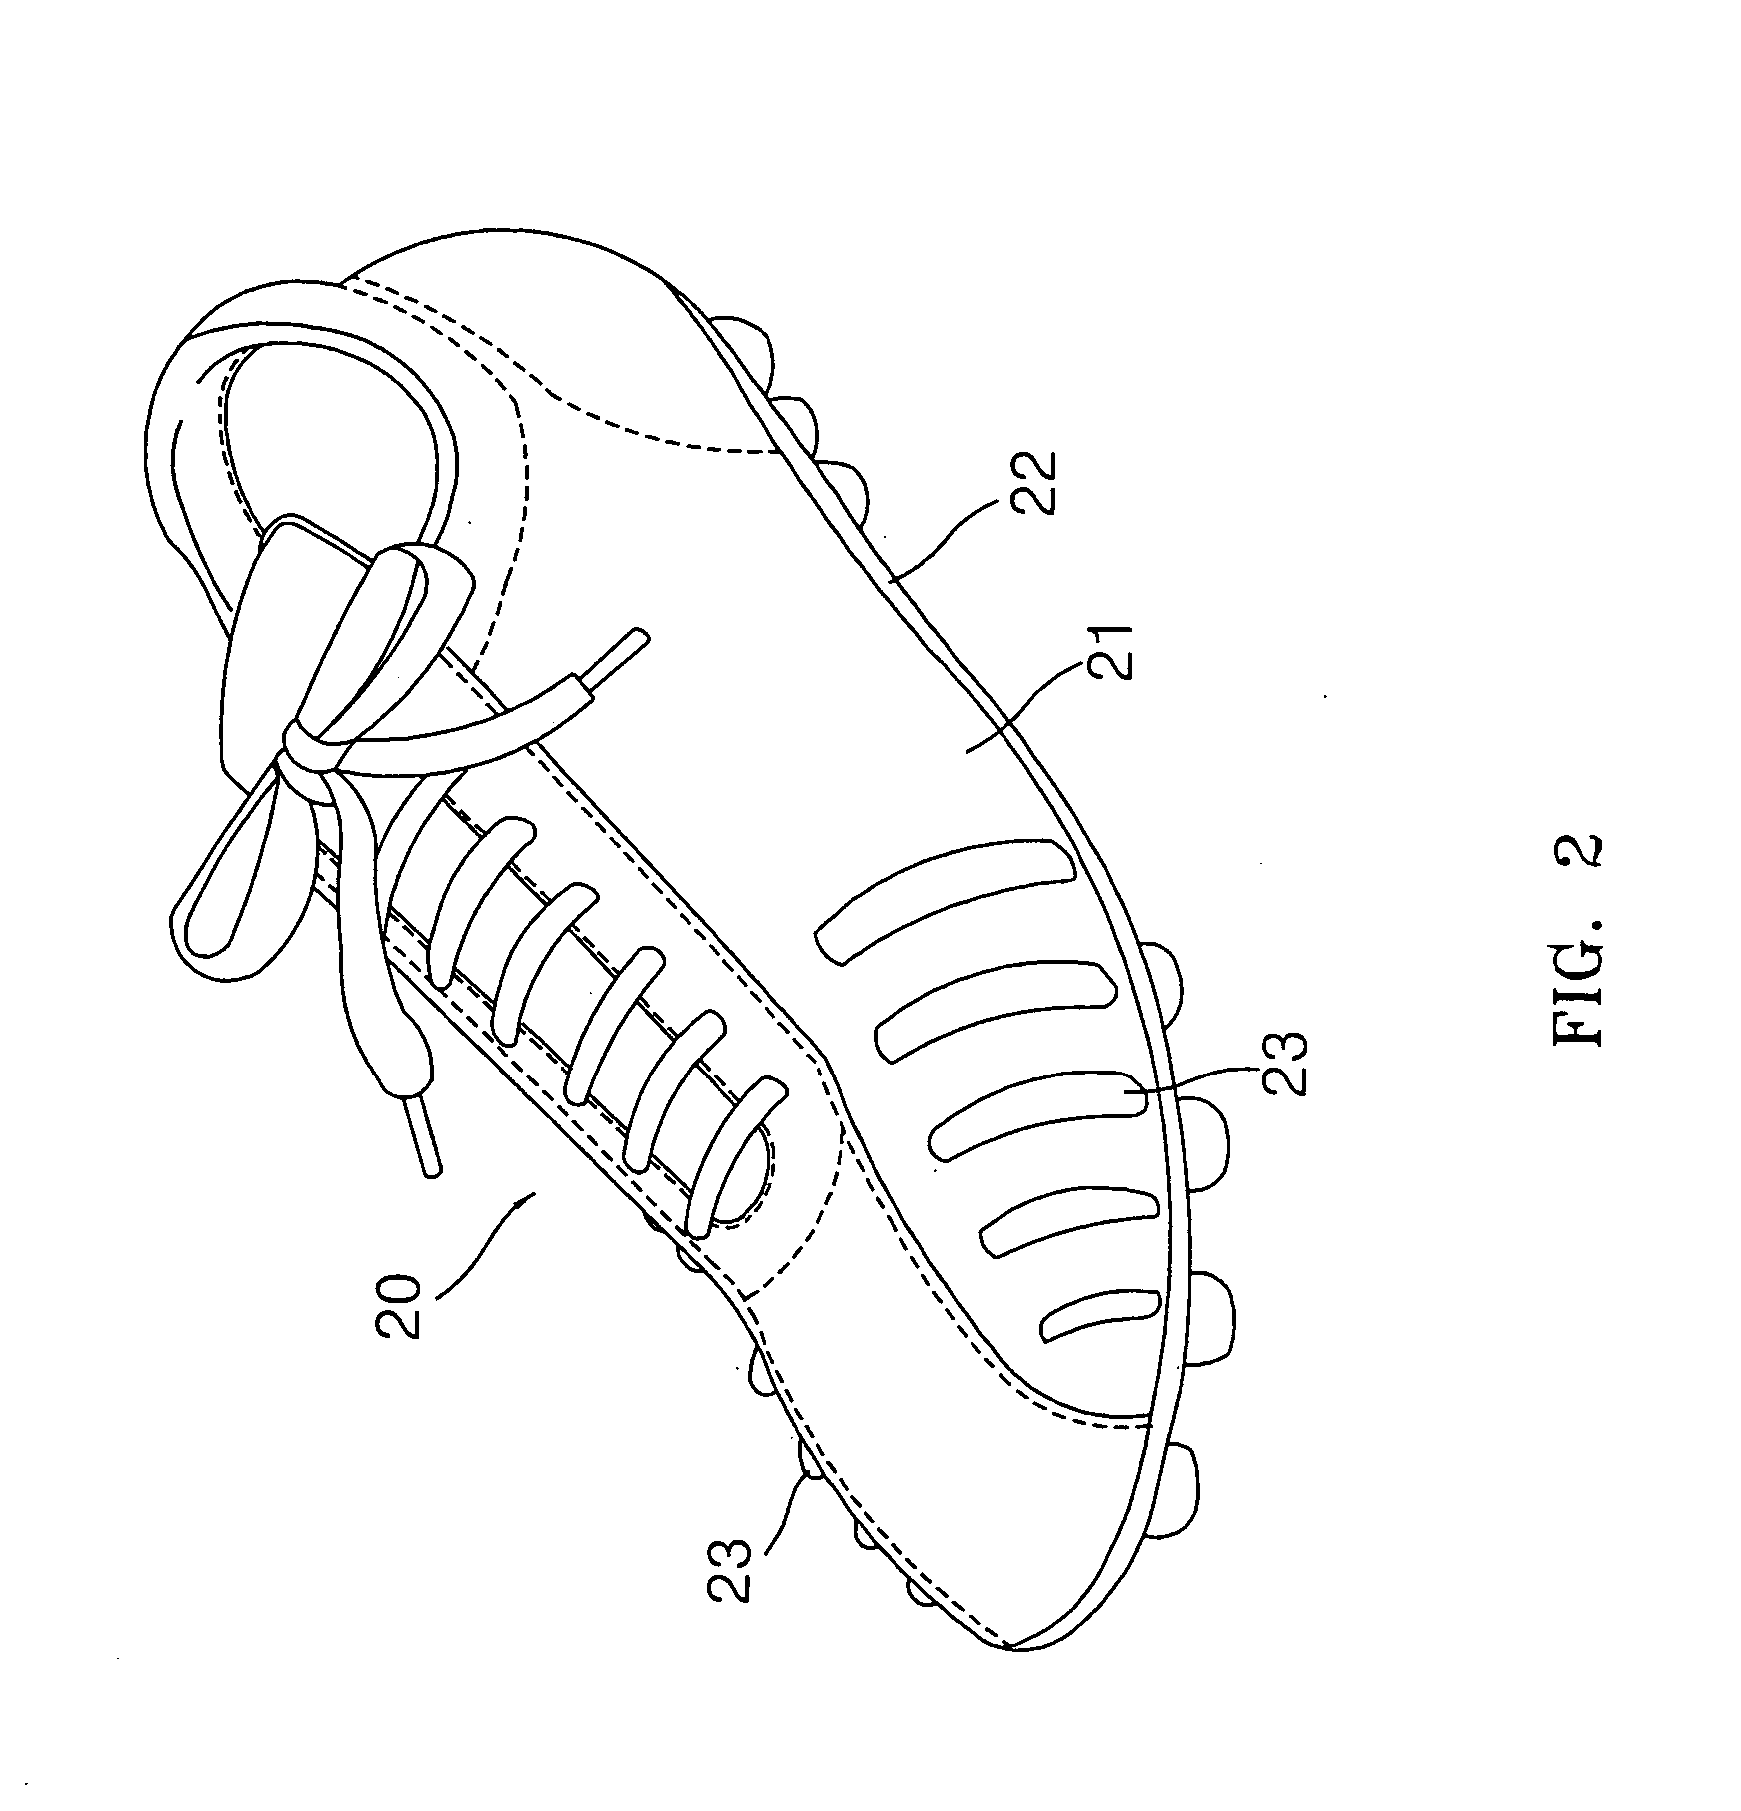 Soccer shoe with improved spinning power and speed